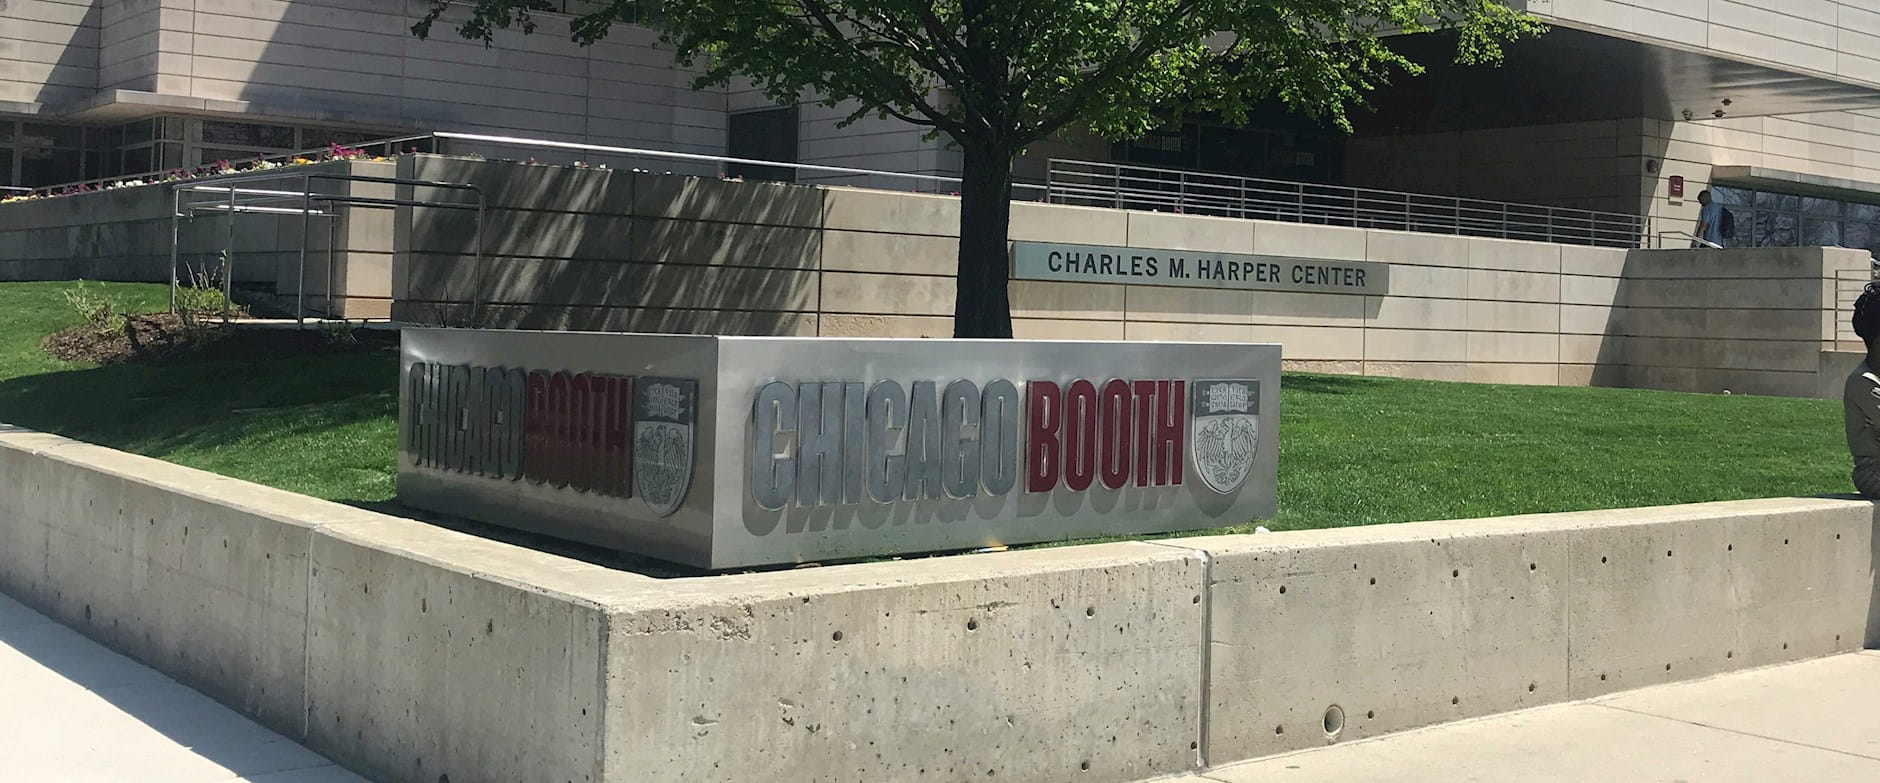 University of Chicago Booth School of Business - Idealist